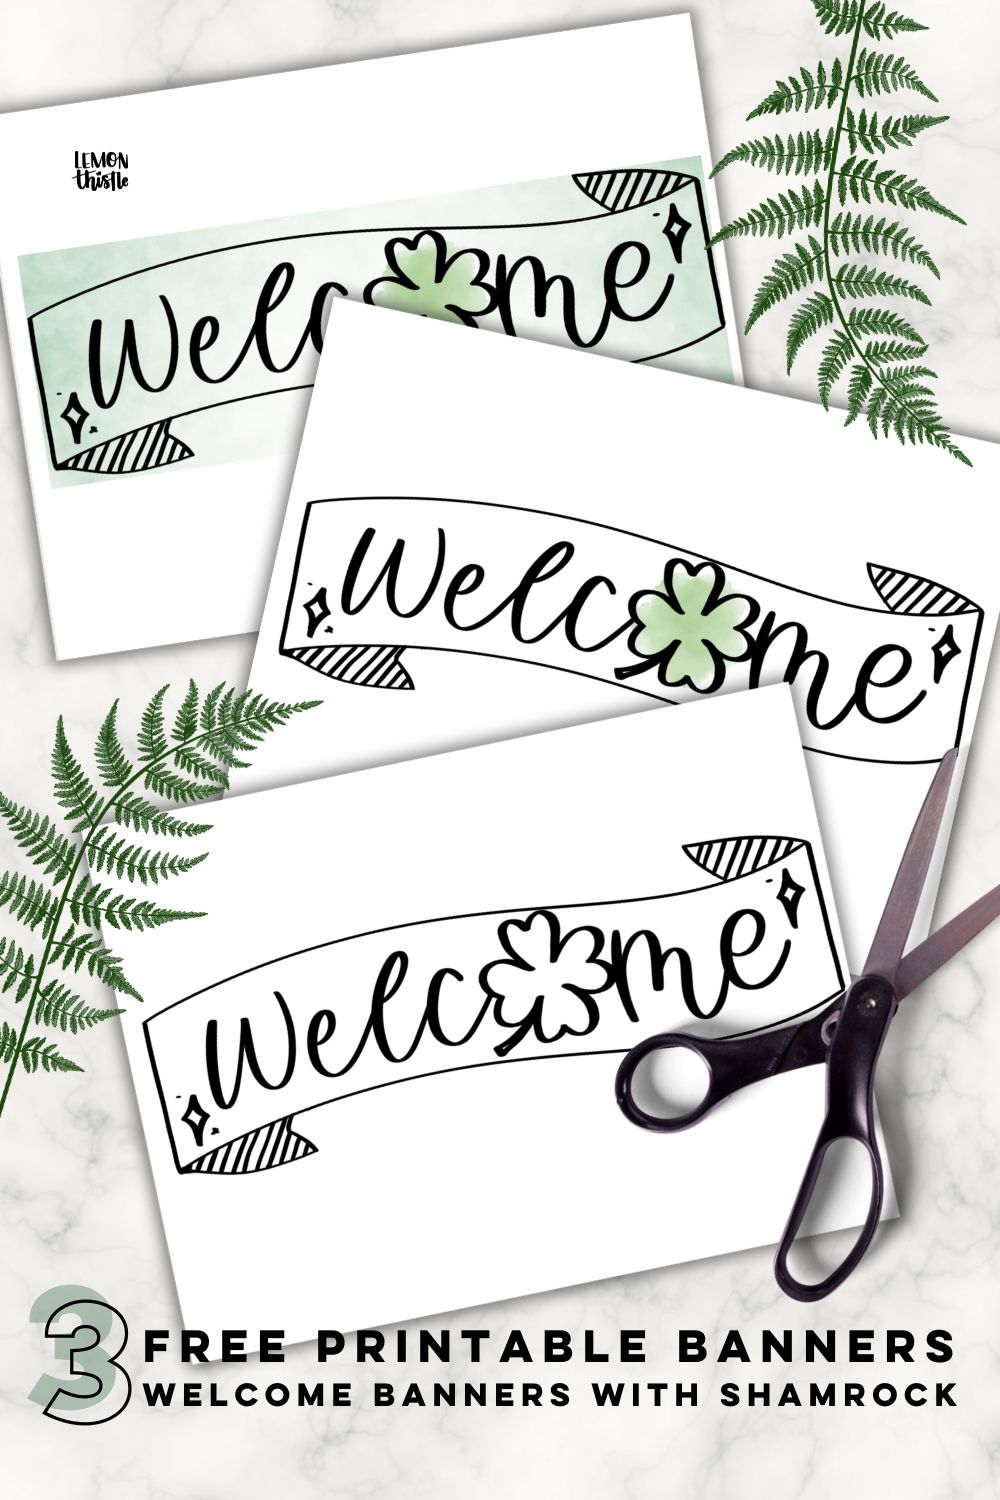 3 printed papers with welcome banners and shamrock as the O - hand lettered designs each with different amounts of color. styled on marble countertop with black scissors and fern leaf text overlay reads: 3 free printable banners welcome banners with shamrock